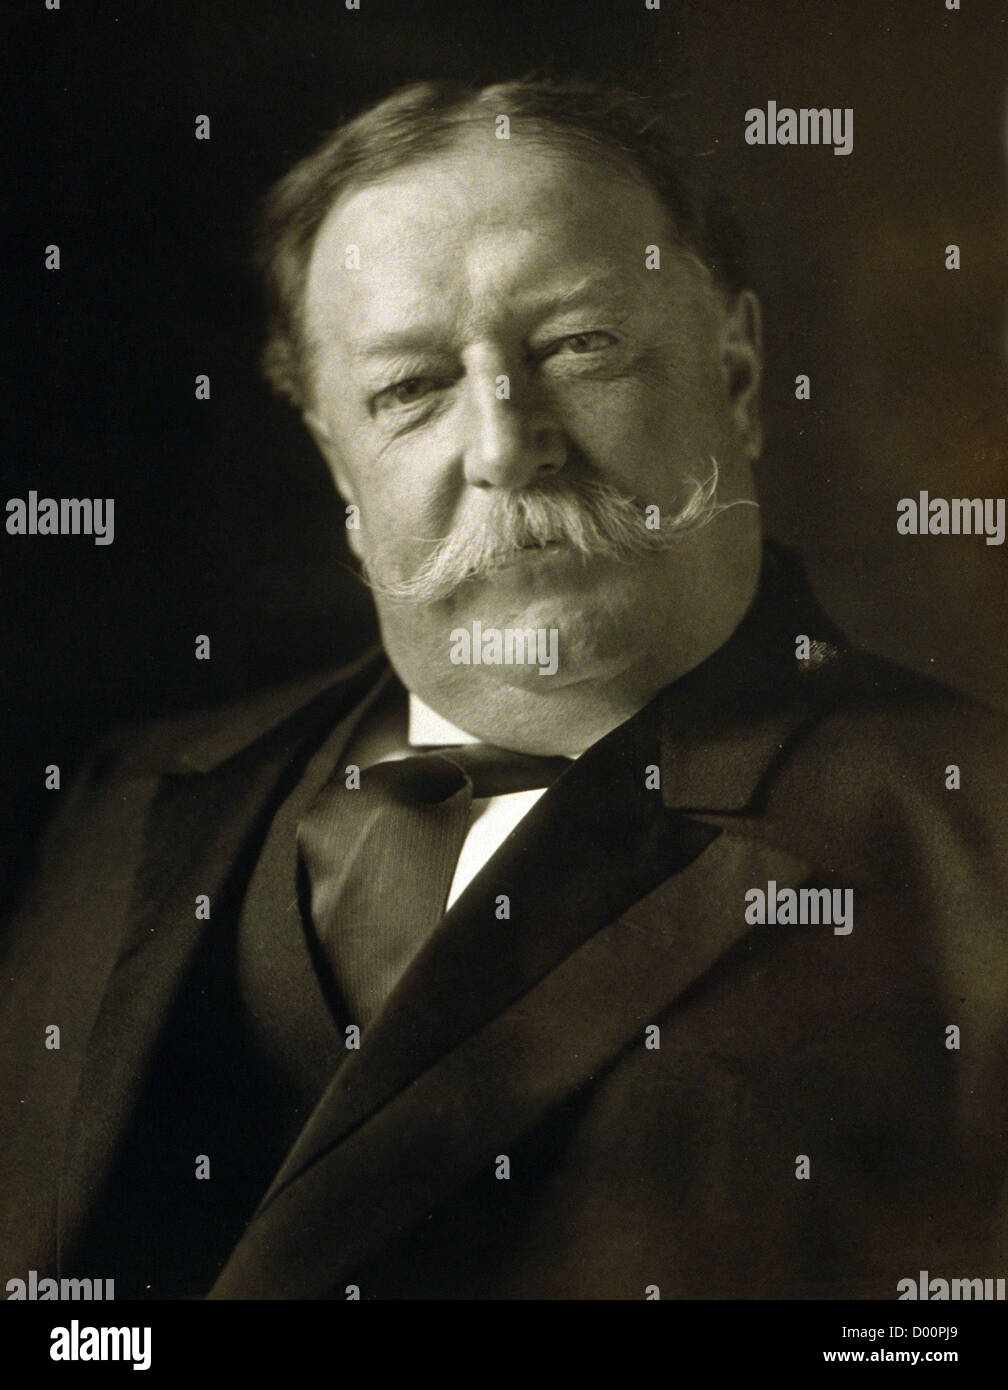 William Howard Taft, the 27th President of the United States Stock Photo